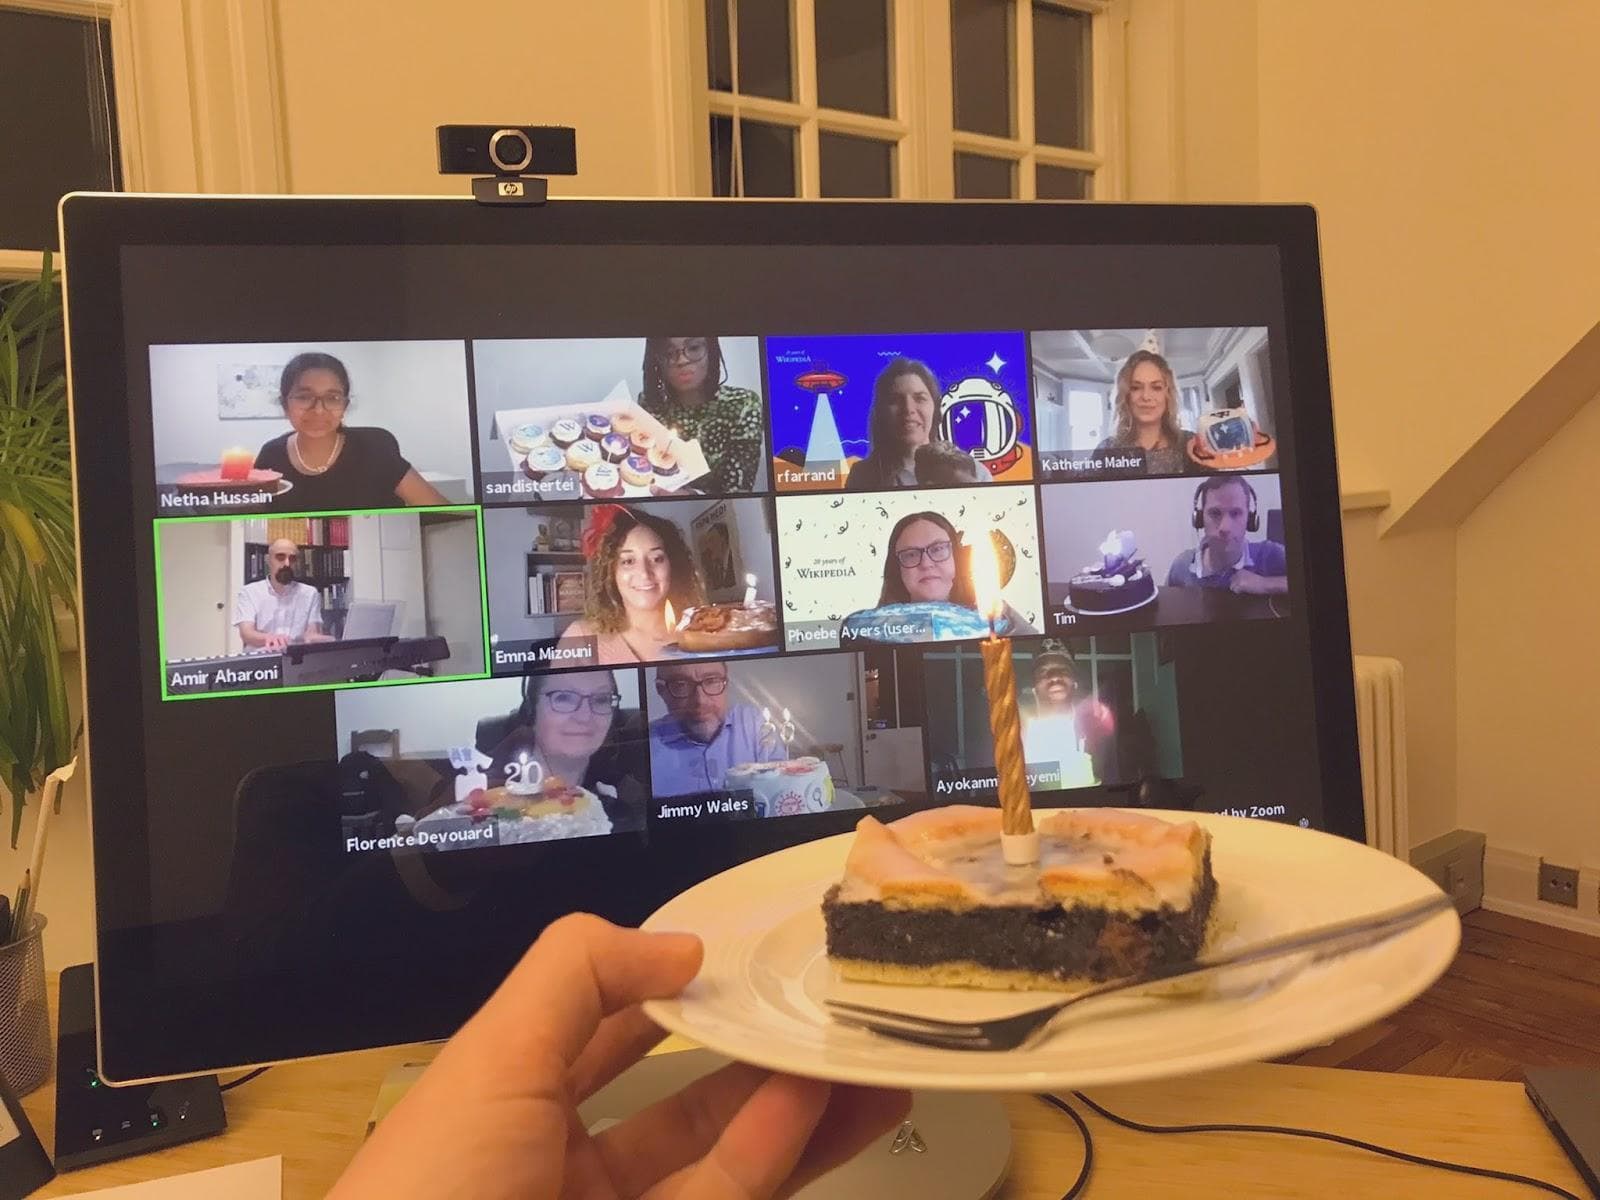 Someone is holding a birthday brownie with a candle on a white plate. They are celebrating a birthday virtually with 11 other people on Zoom.